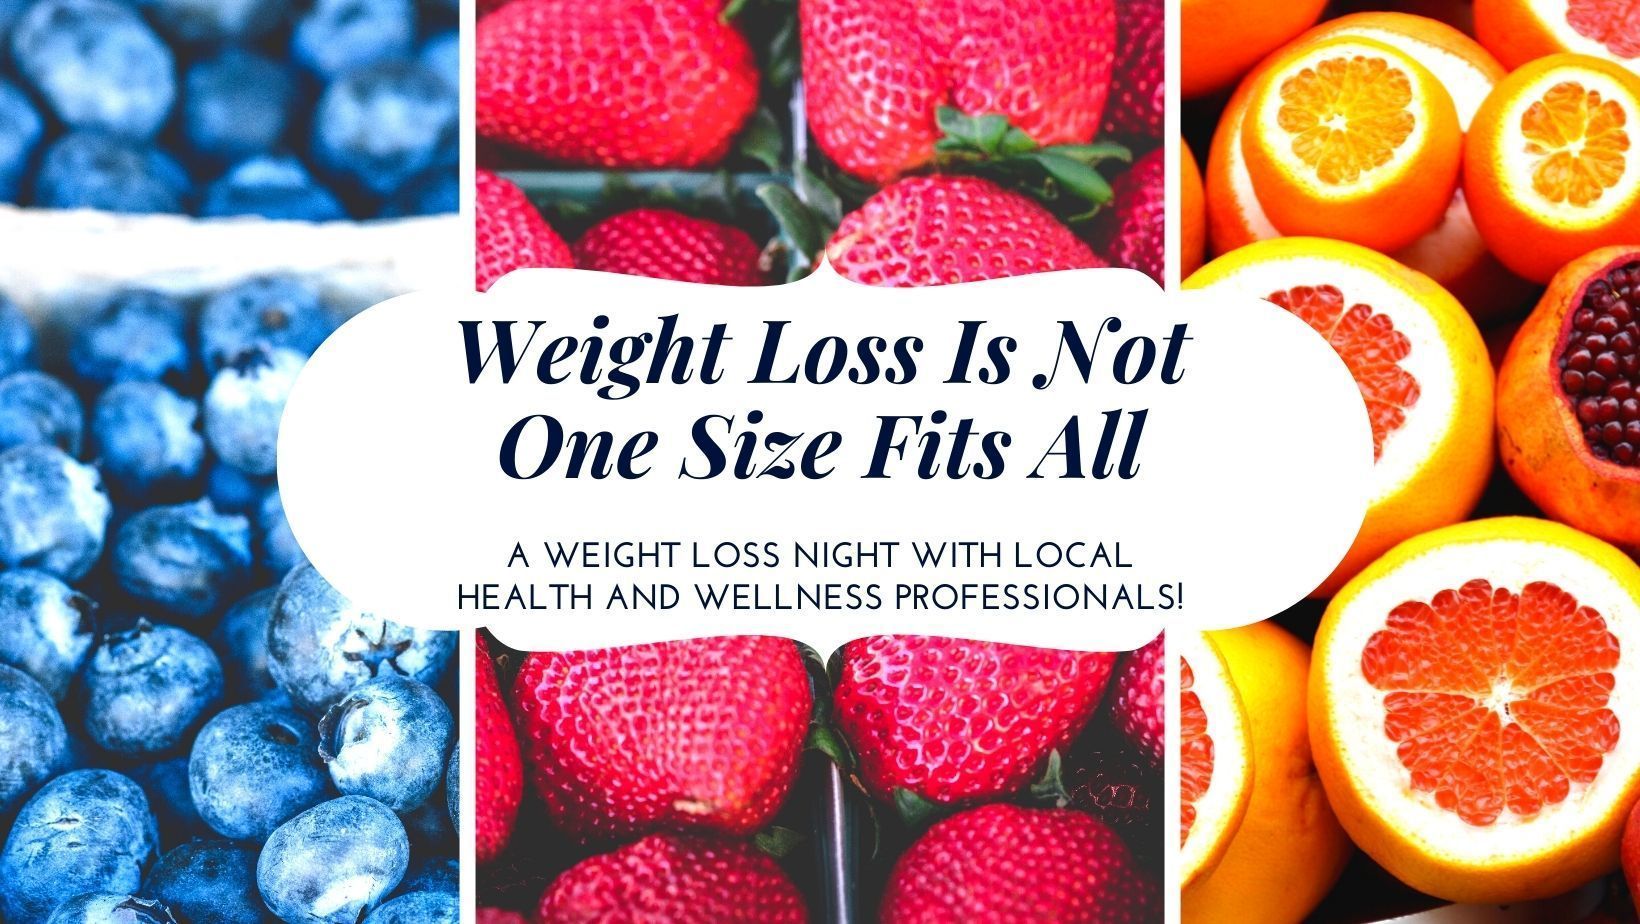 Weight Loss Solutions, Samples, and Discounts (September 1st FREE event) 3047 Industrial Bethel Park, Bethel Park, Pennsylvania, United States